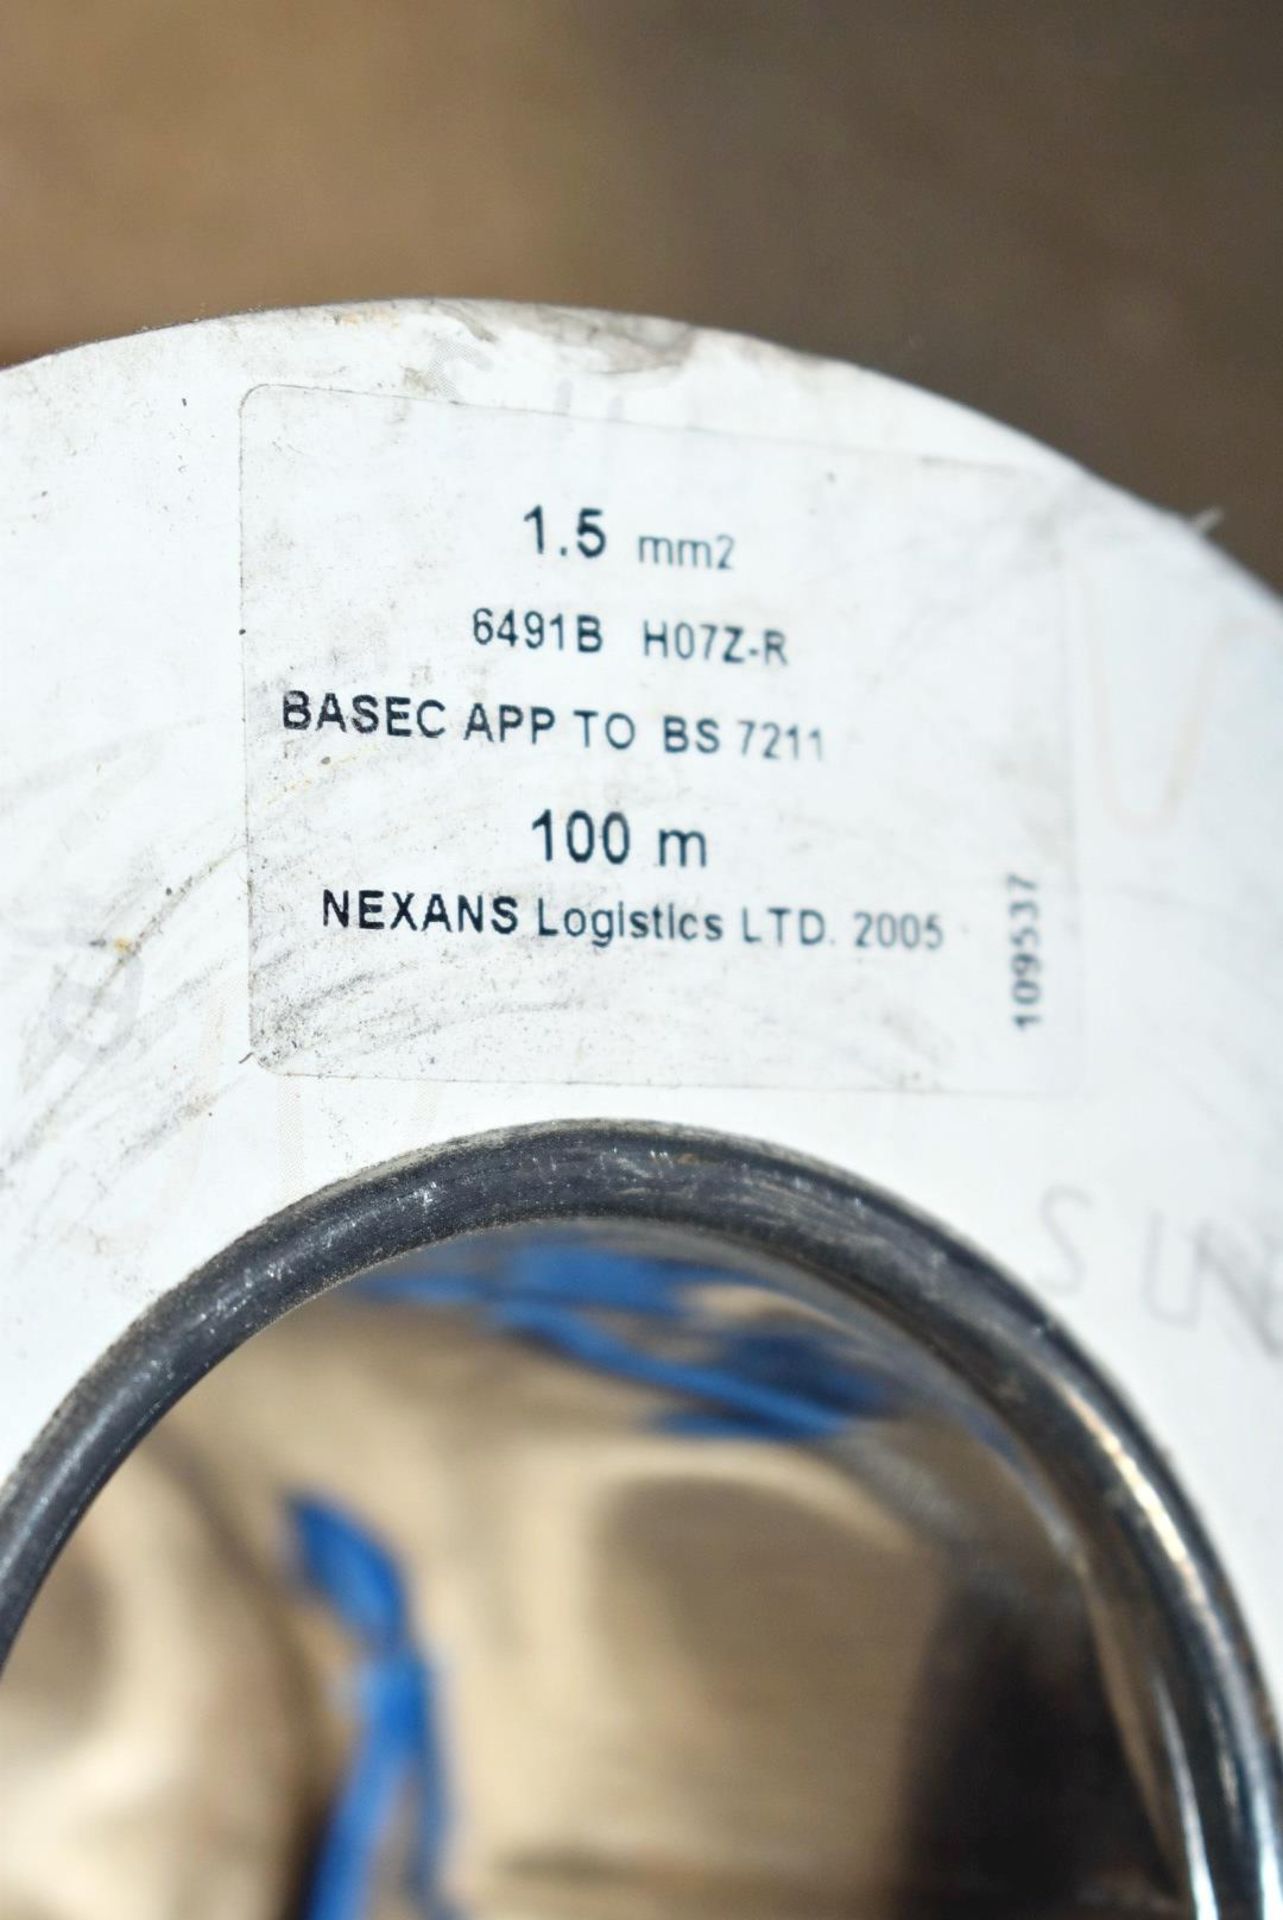 1 x Reel of Nexaus 100m Blue 6491B H07Z-R Electrical Cable - Unused Stock - Image 2 of 3